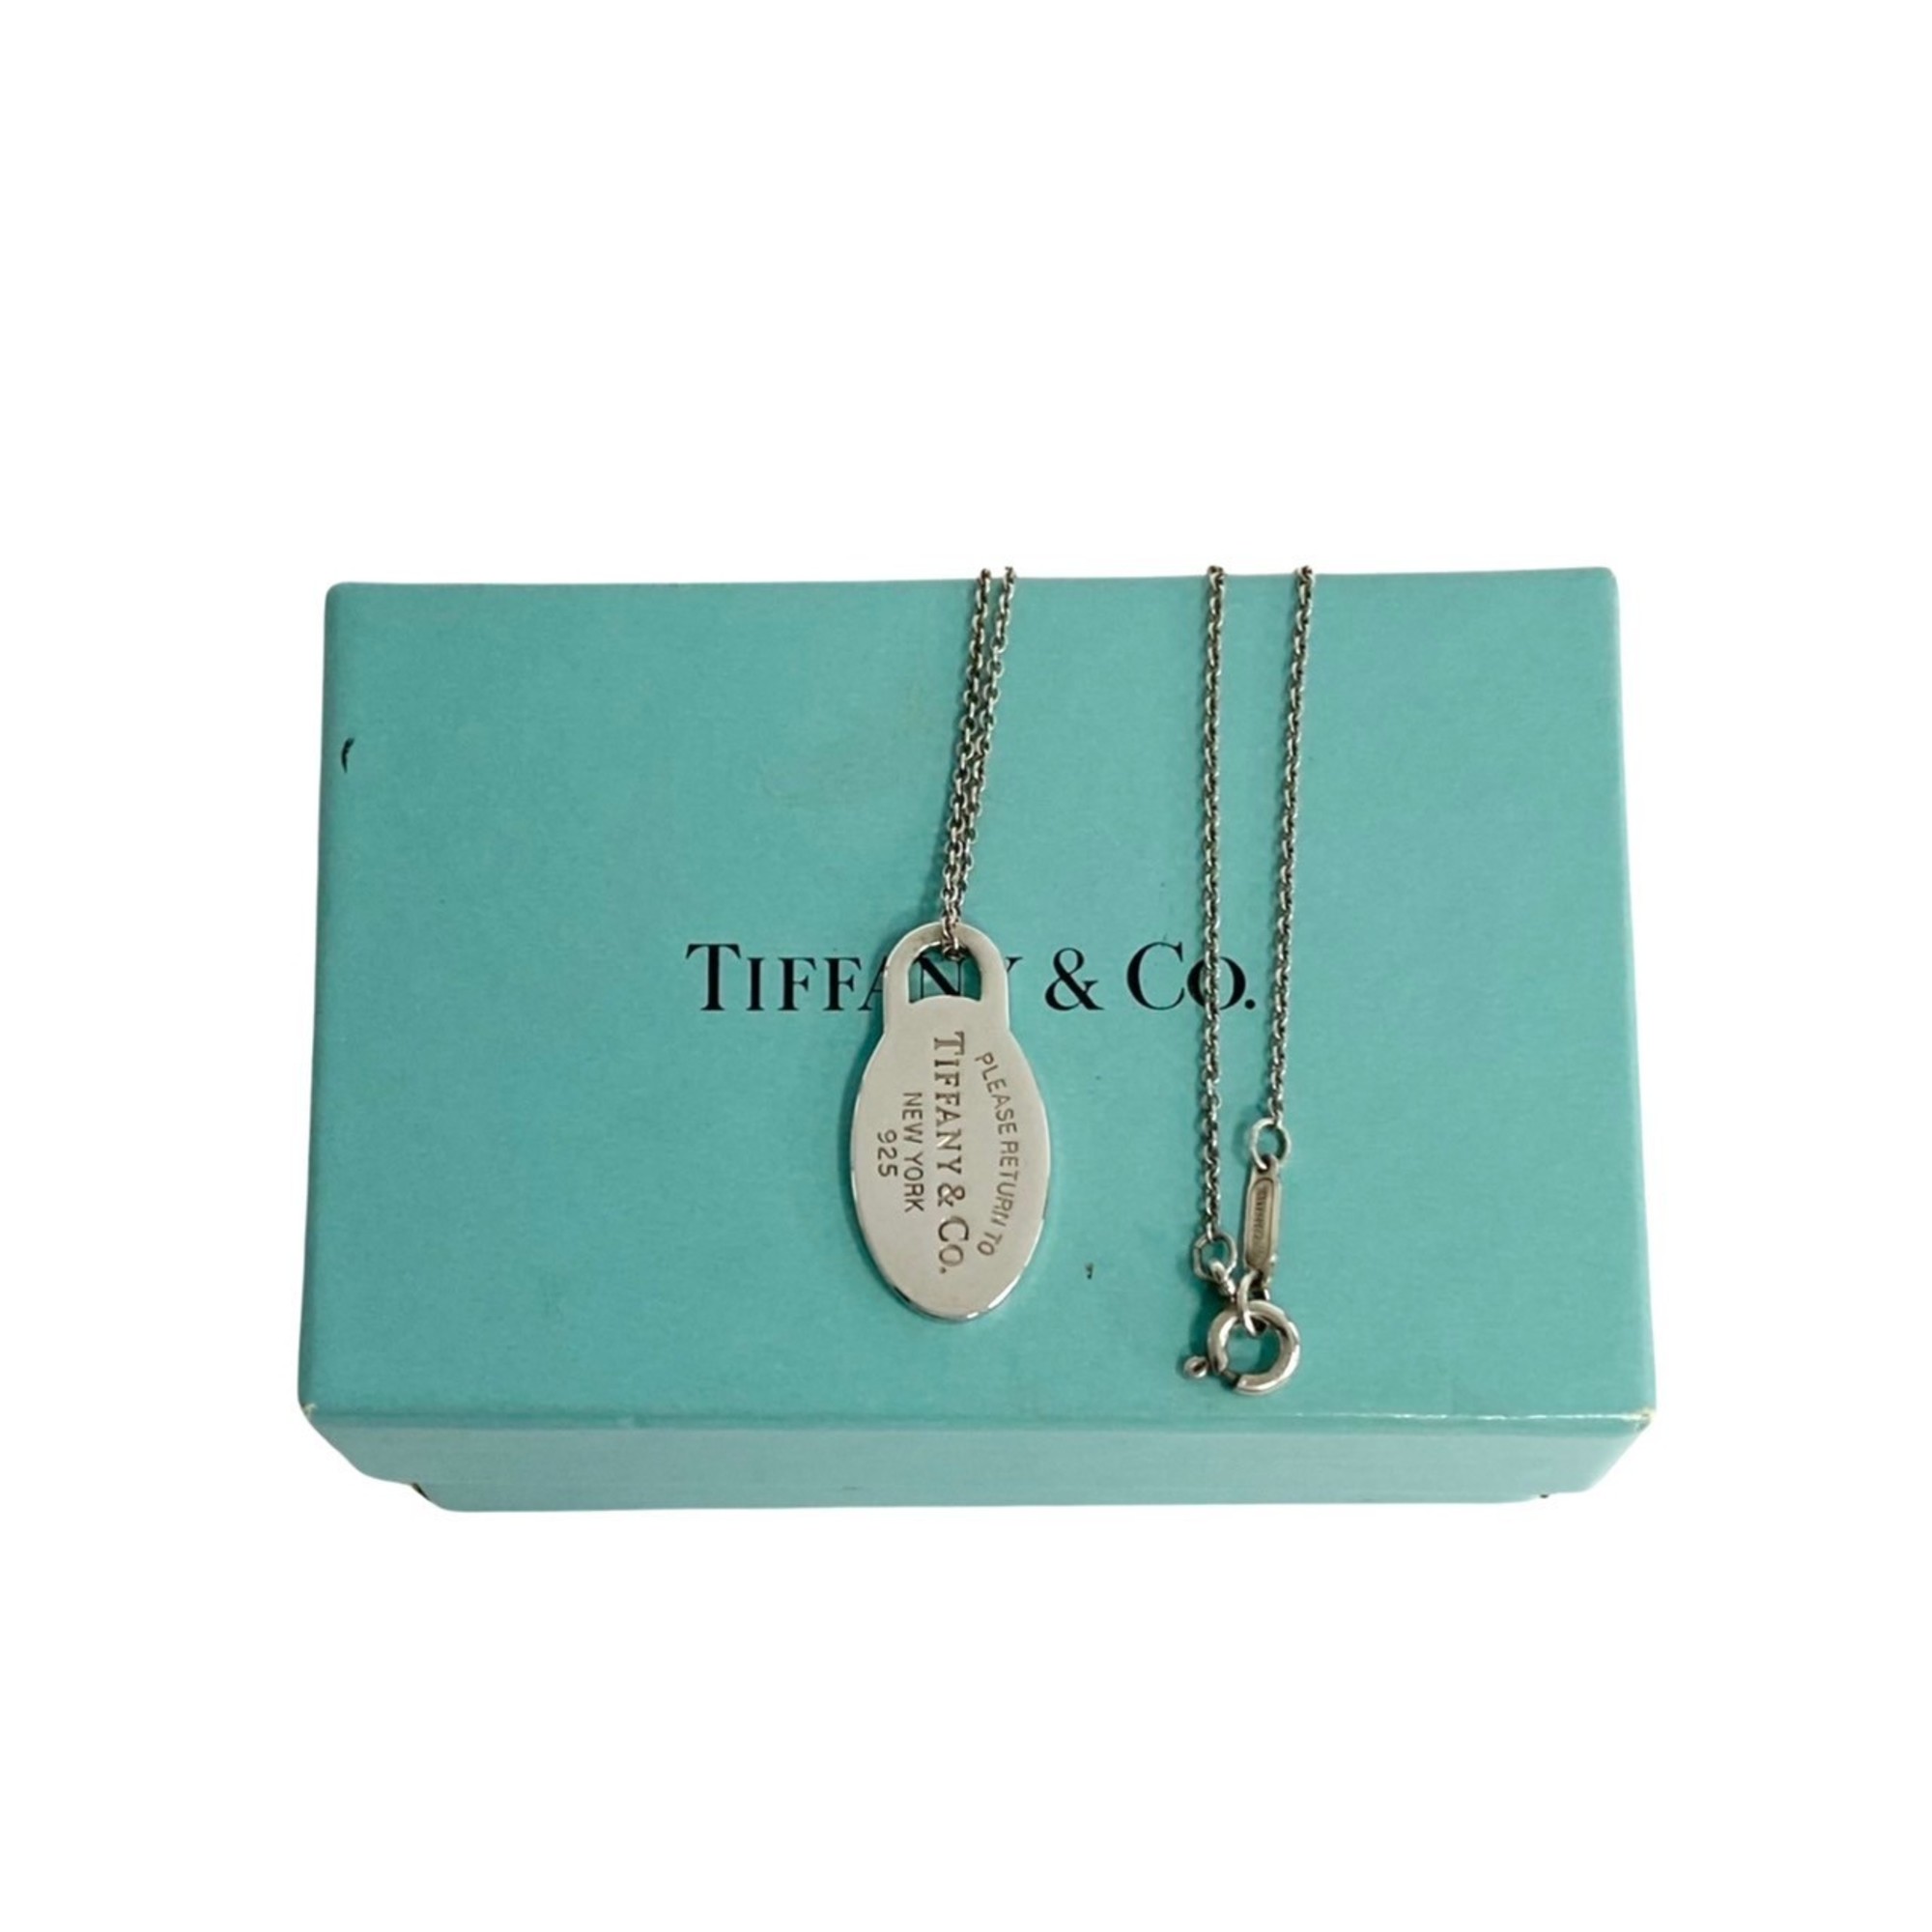 TIFFANY&Co. Tiffany Return to Oval Tag Silver 925 Chain Necklace Pendant 29787